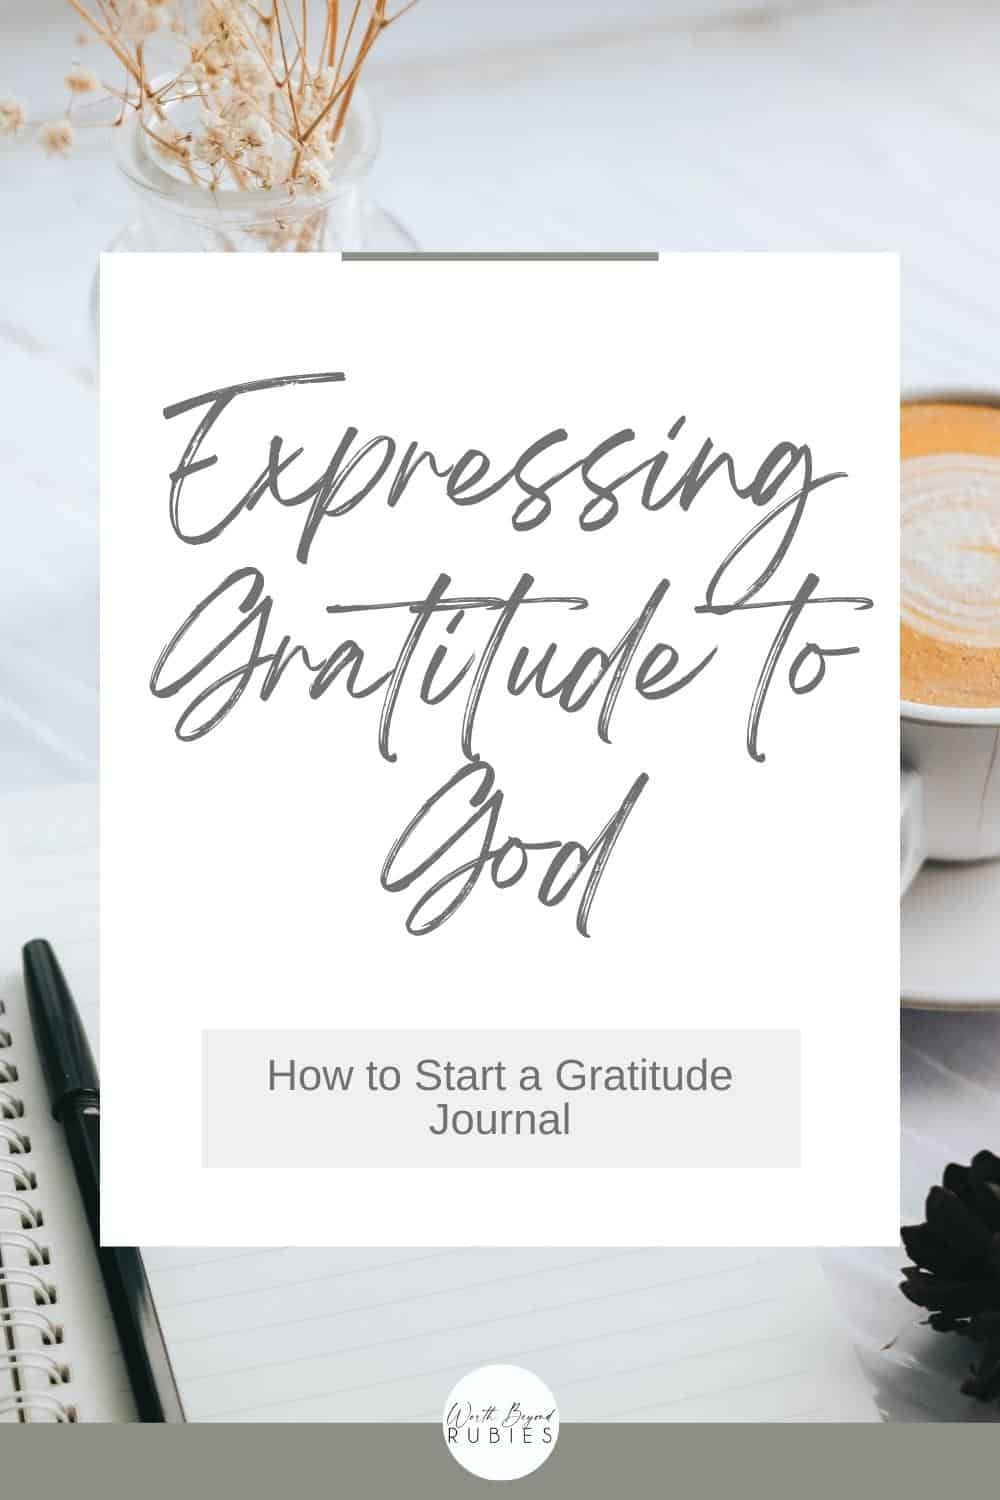 an image in the background of a latte and a journal and pen and a text overlay that says Expressing Gratitude to God - How to Start a Gratitude Journal and the Worth Beyond Rubies logo at the bottom